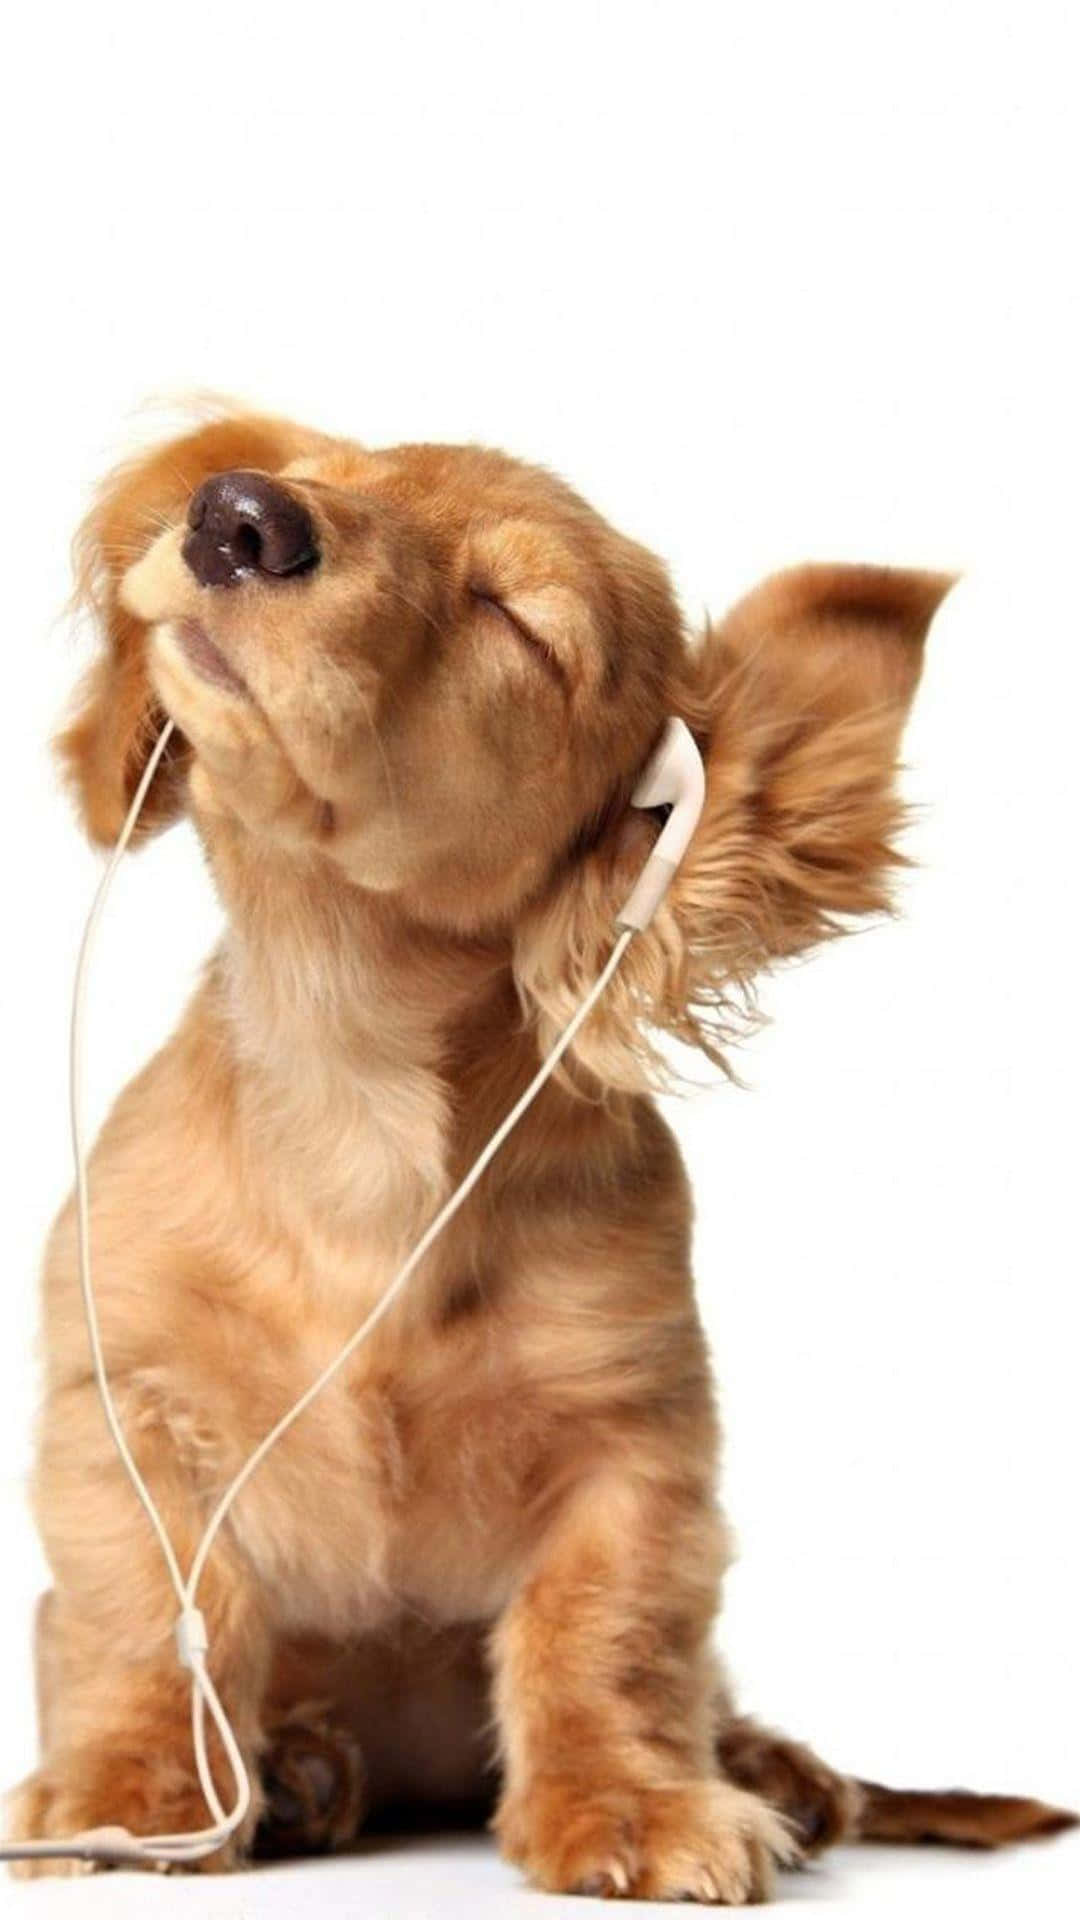 A Dog Listening To Music With Headphones Wallpaper